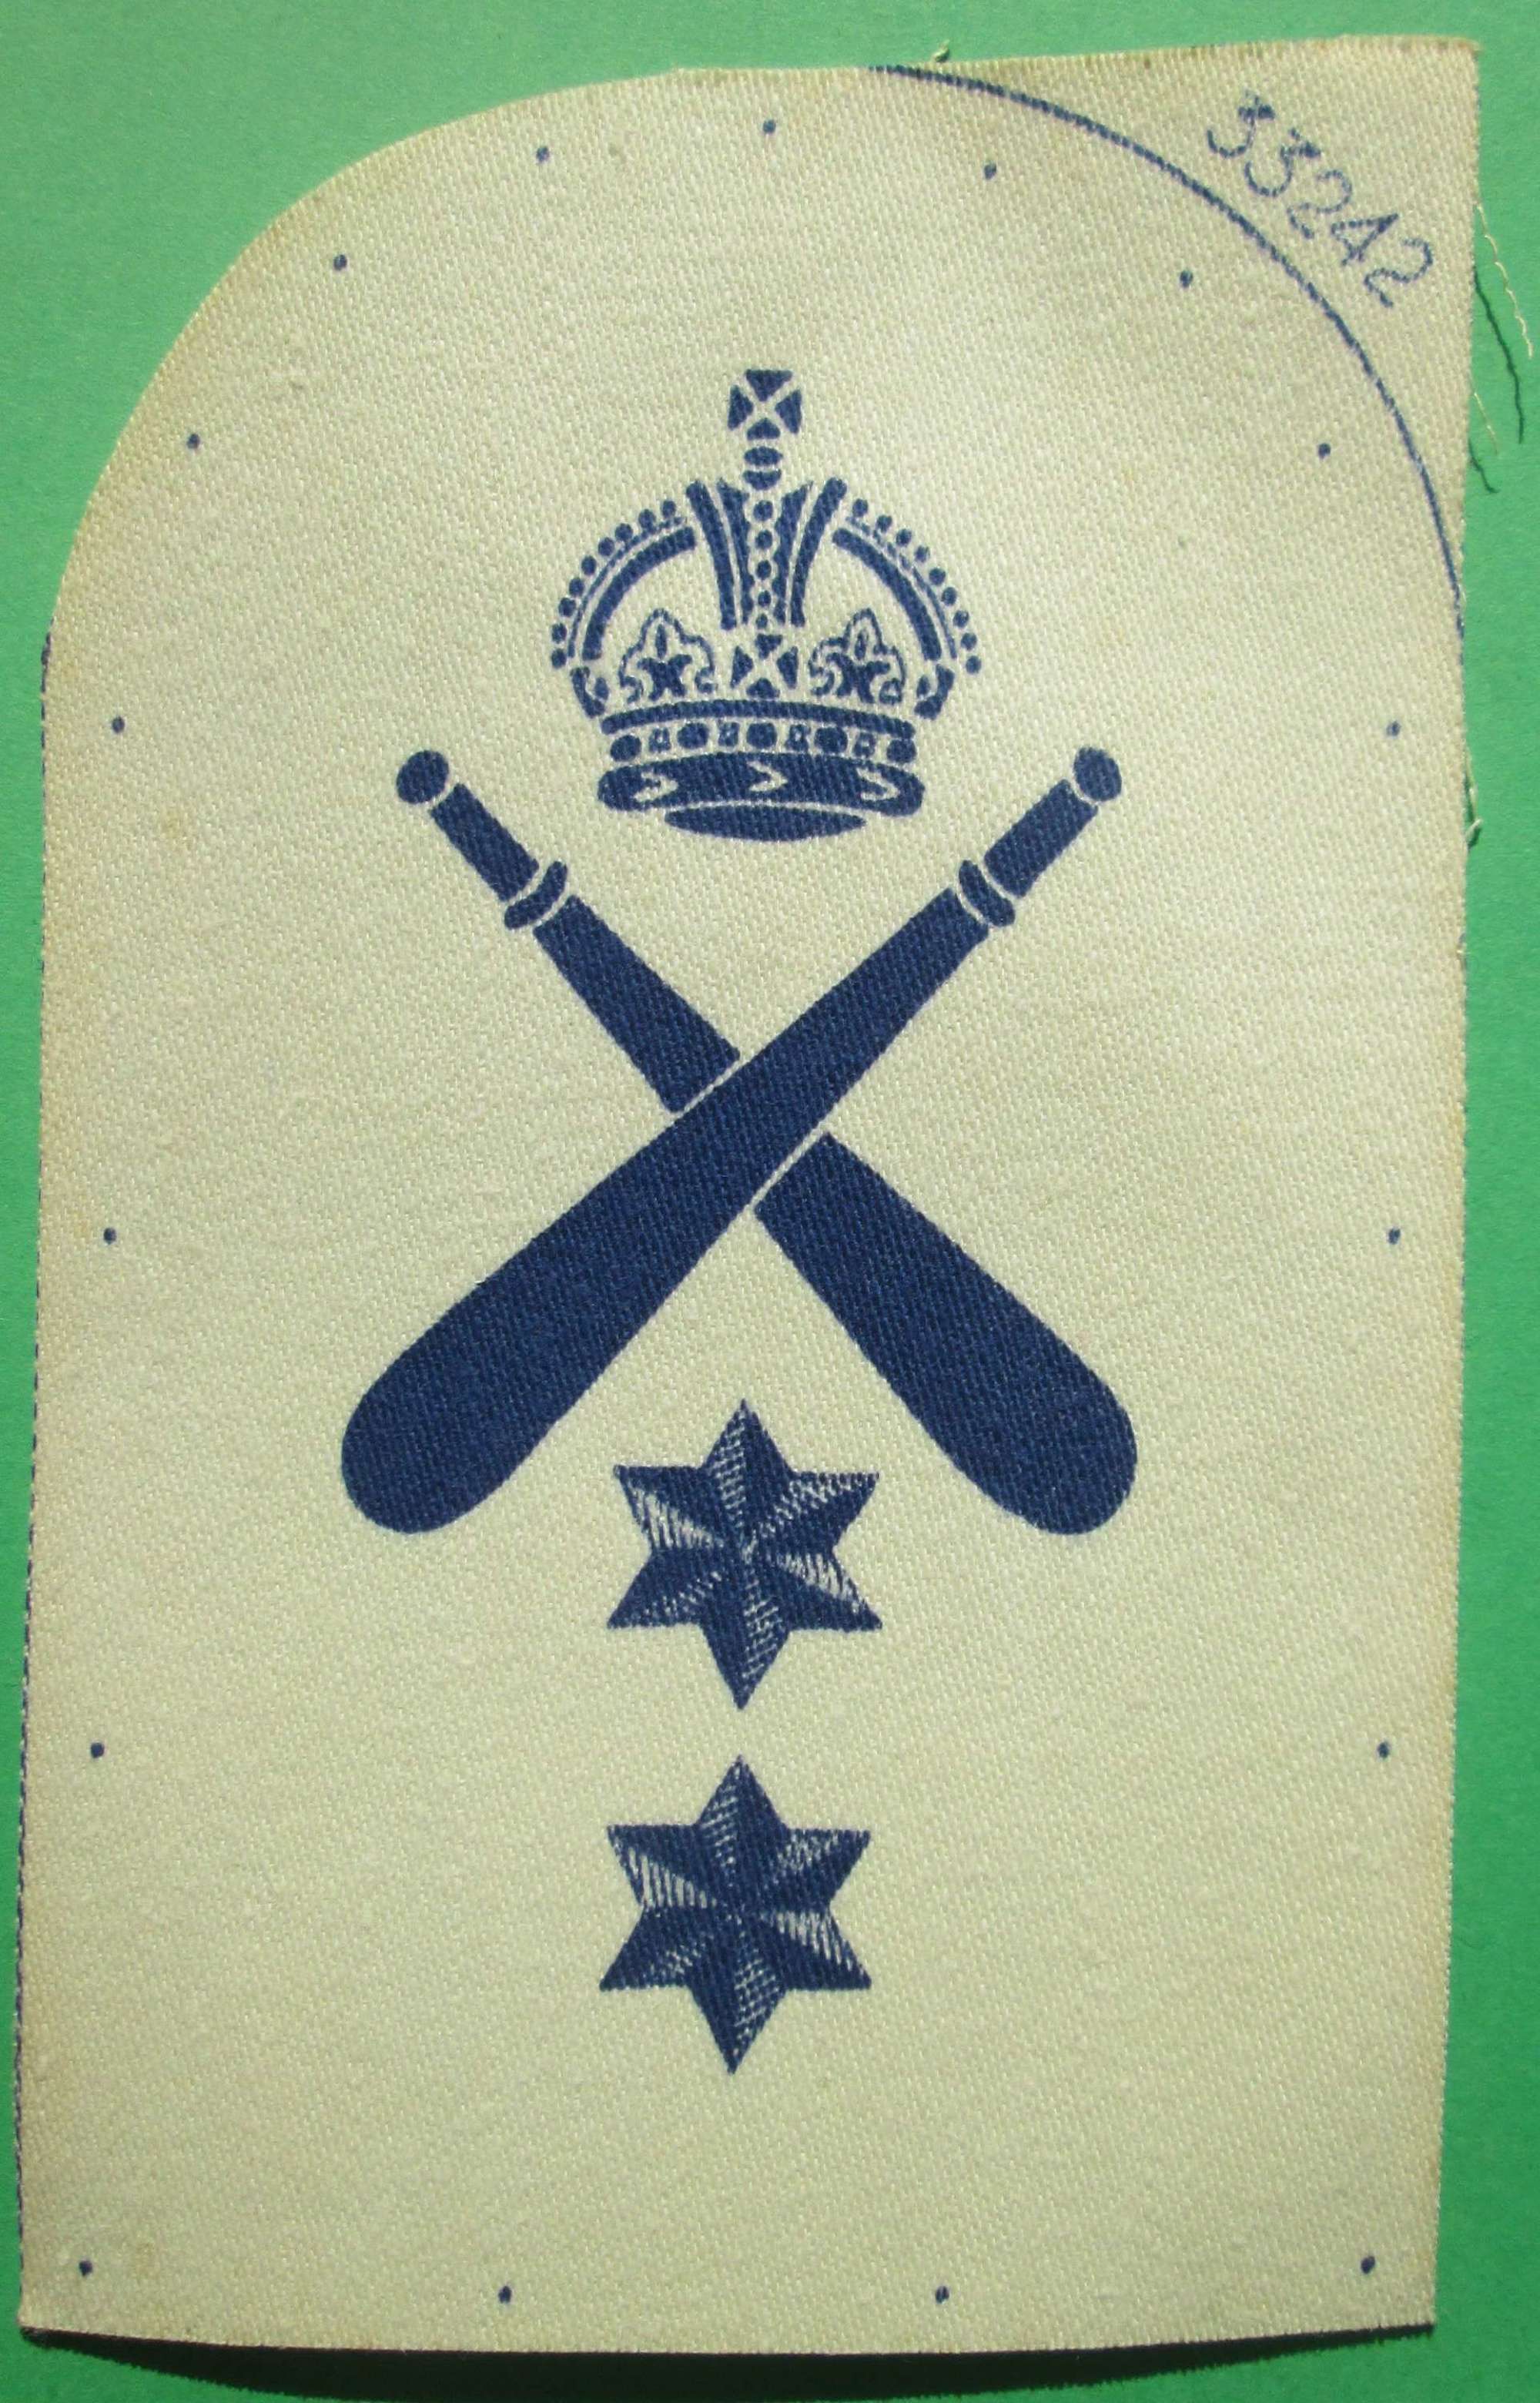 A ROYAL NAVY PHYSICAL TRAINING INSTRUCTOR BRANCH LEADING RATE BADGE